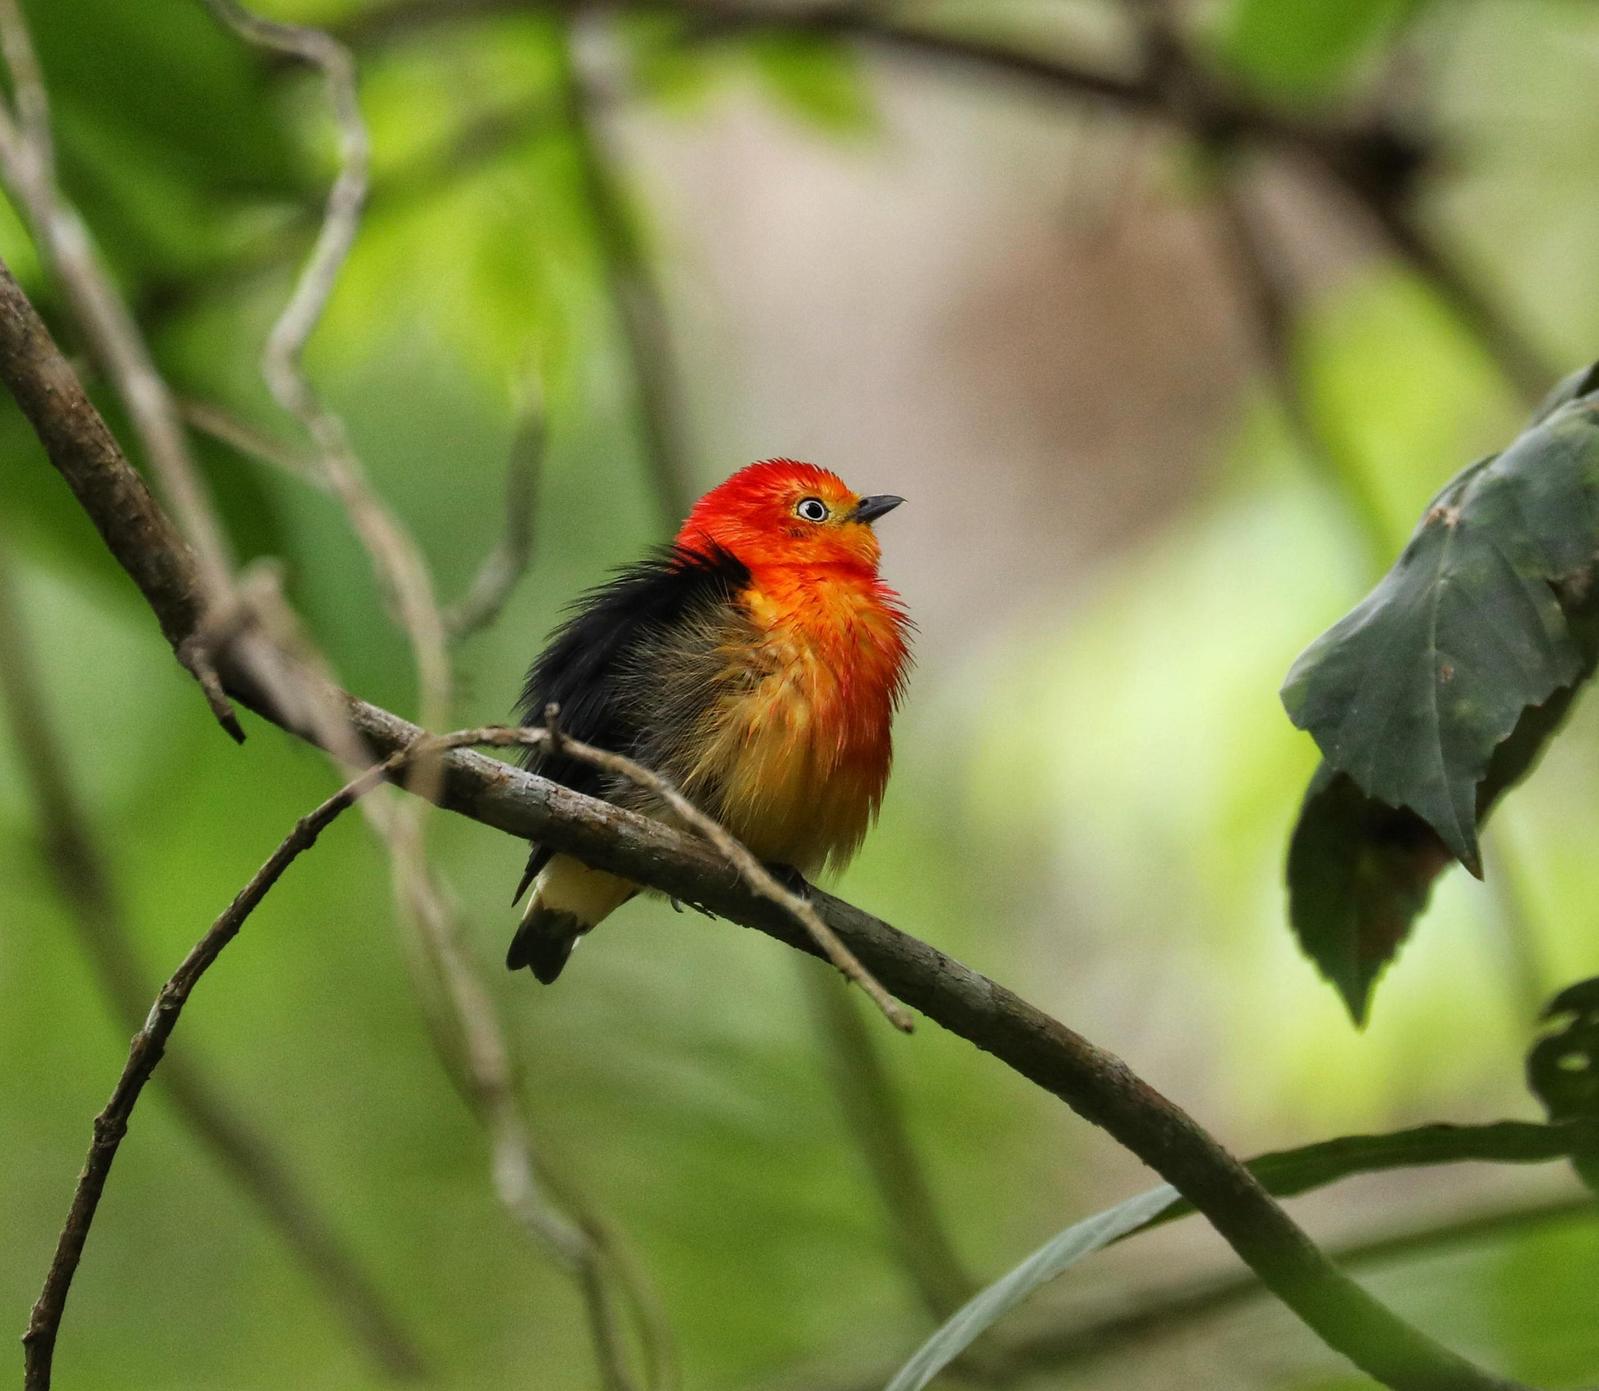 Band-tailed Manakin Photo by Debbie Reynolds